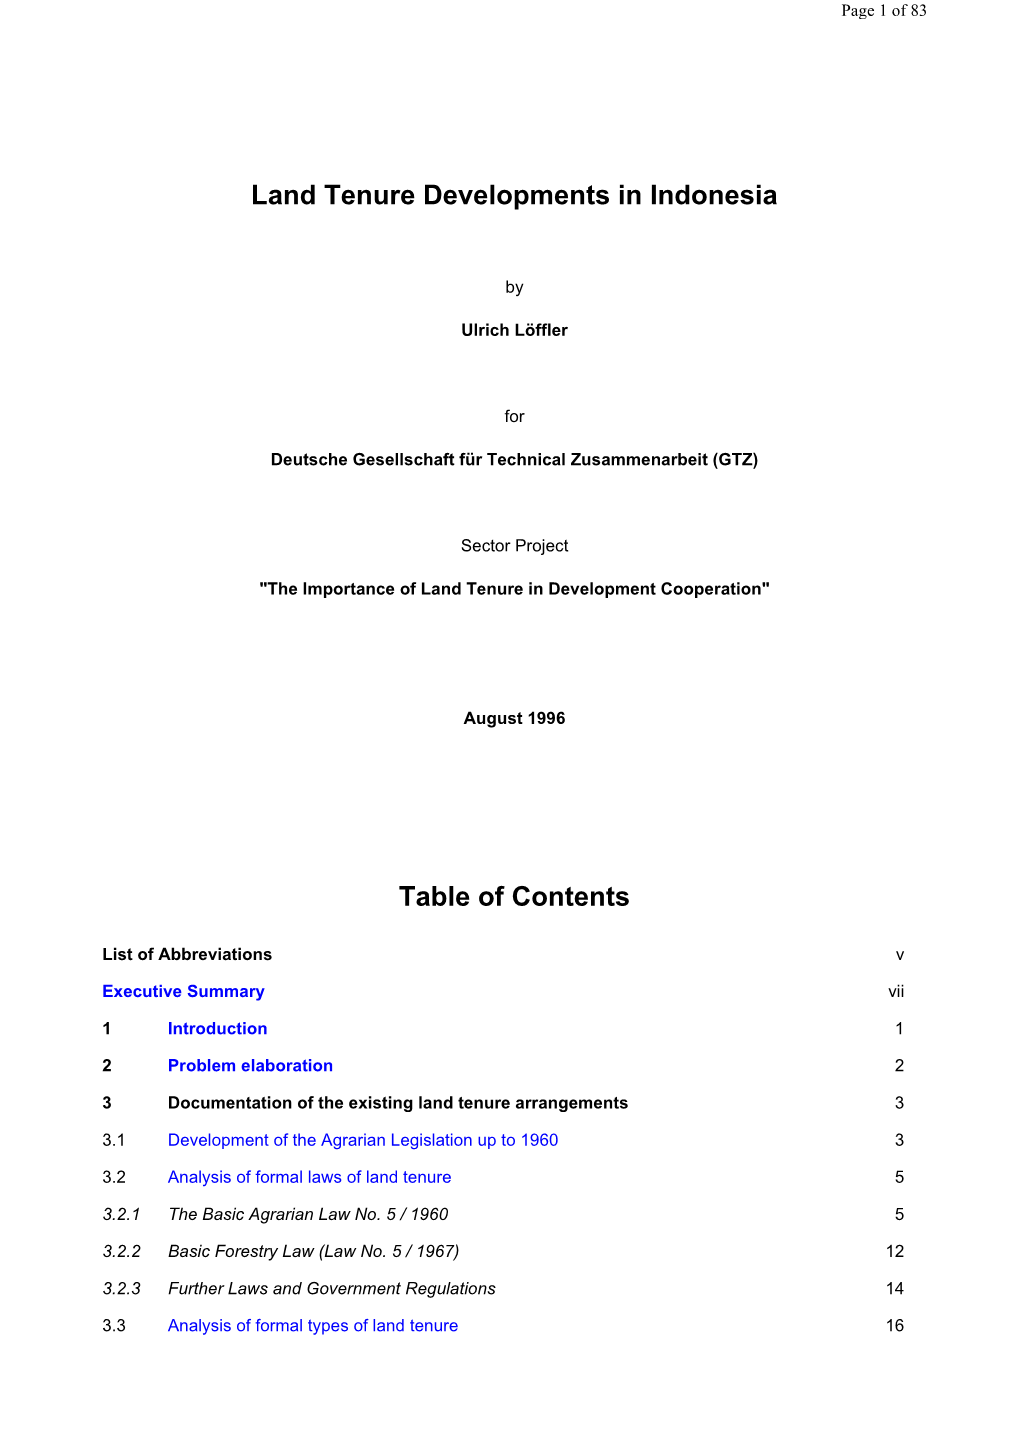 Land Tenure Developments in Indonesia Table of Contents